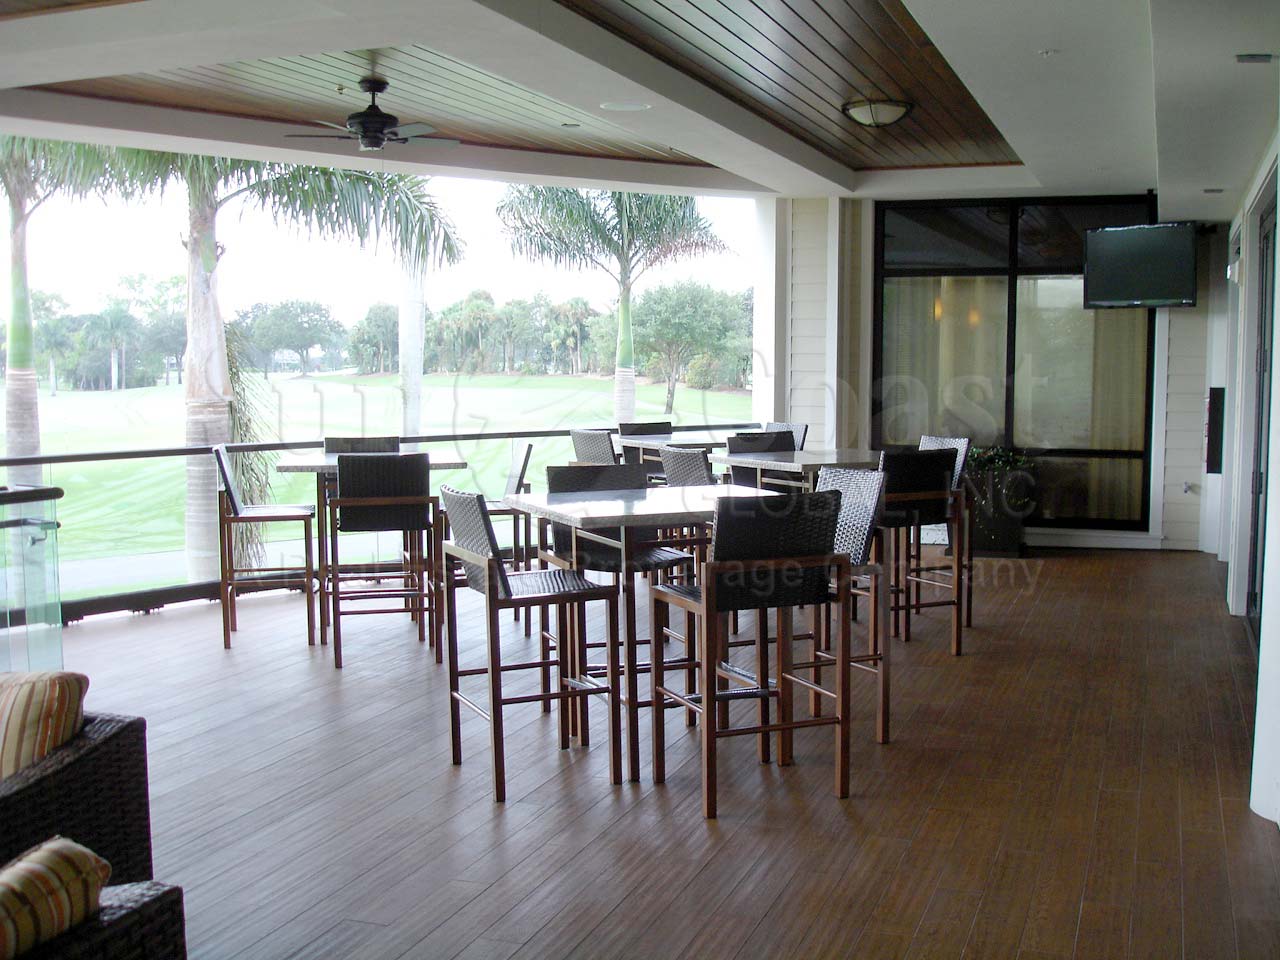 WYNDEMERE Golf and Country Club outside dining area